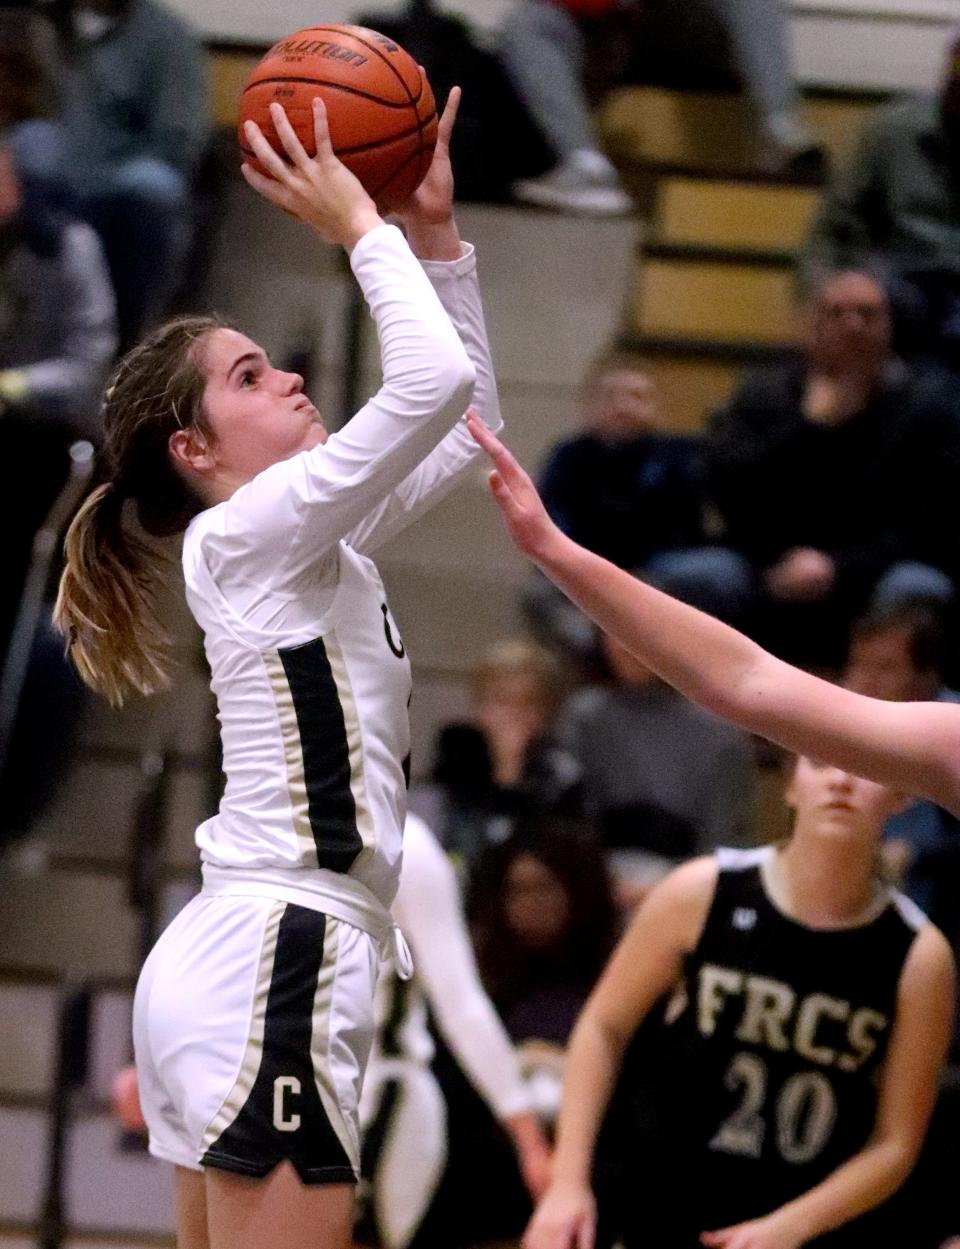 Central's Olivia Hart (2) goes up for a shot during the game against FRCS on Monday, Nov. 21, 2022, at Central.